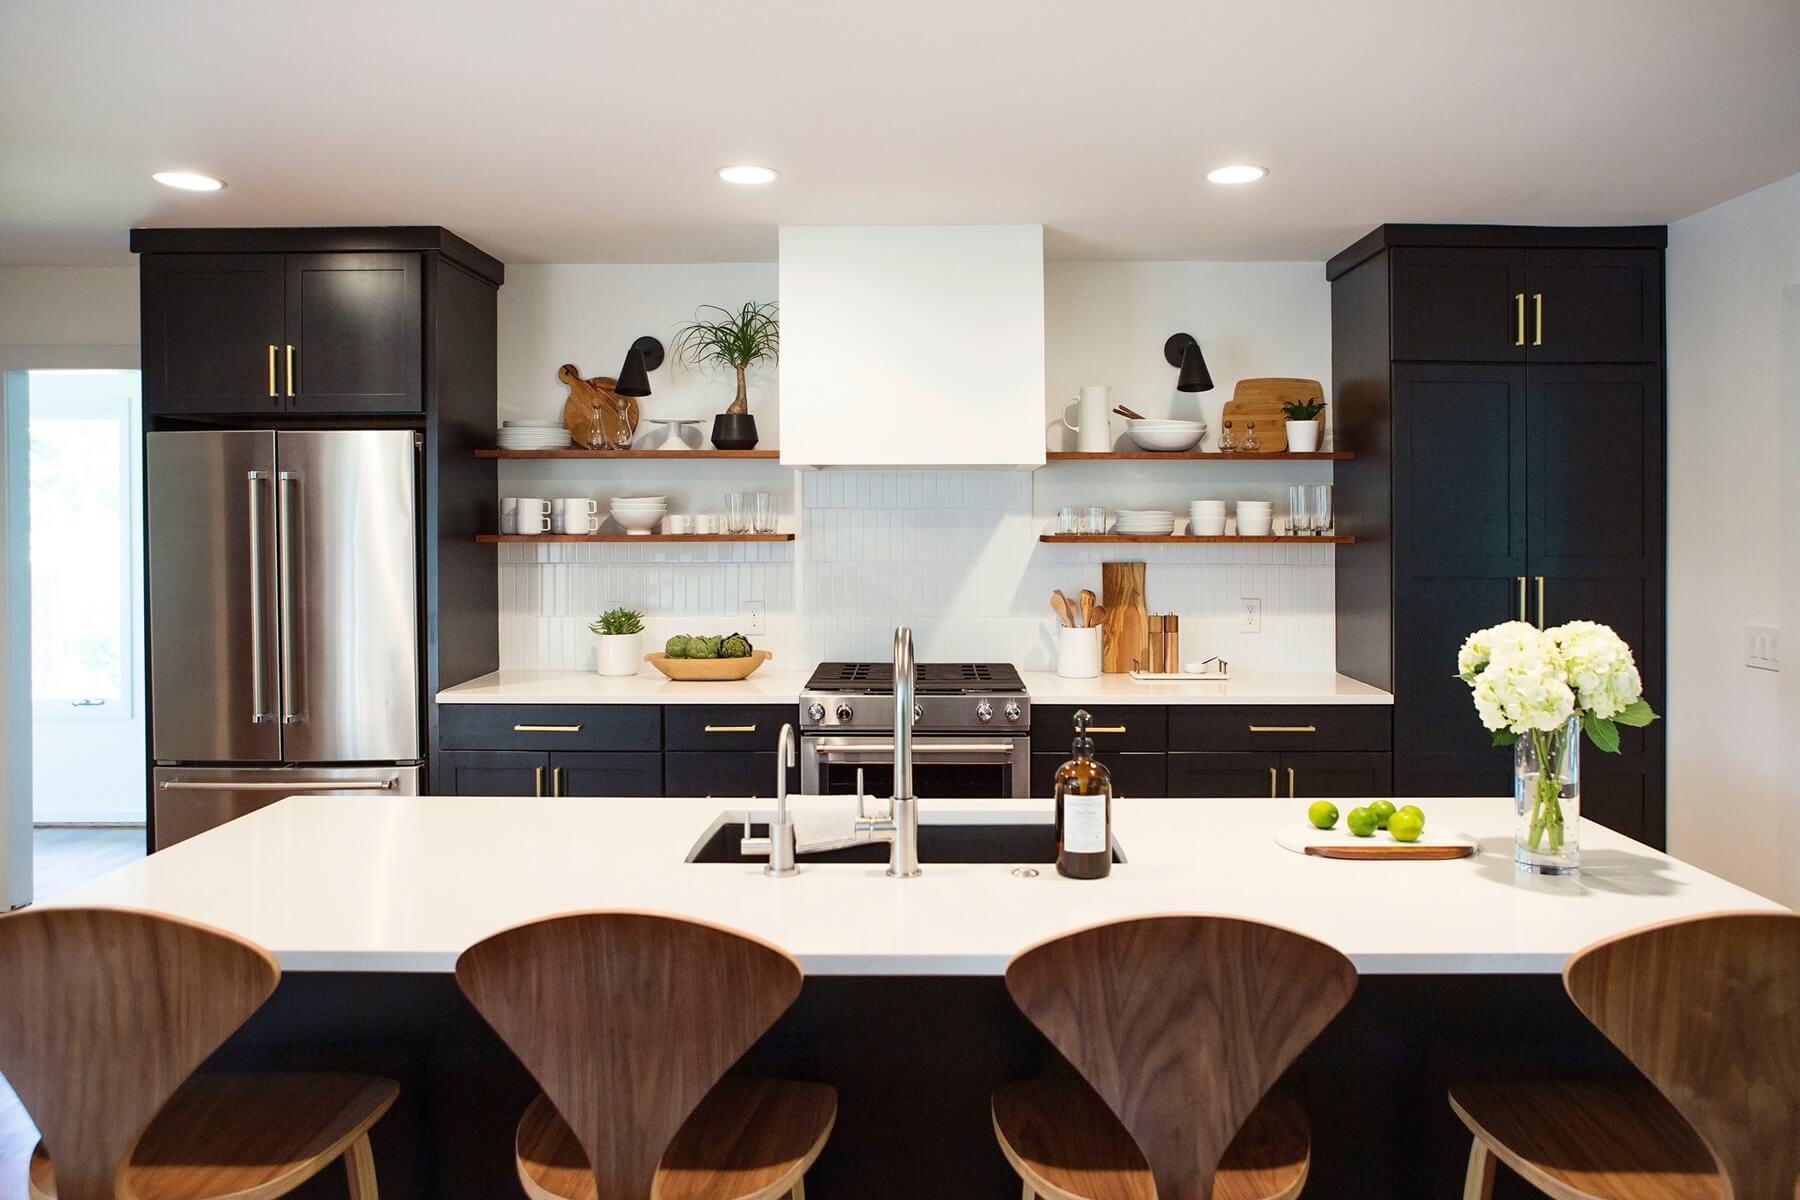 Alima's personal kitchen beams with personal style. Image: Ashley Lauren Studios